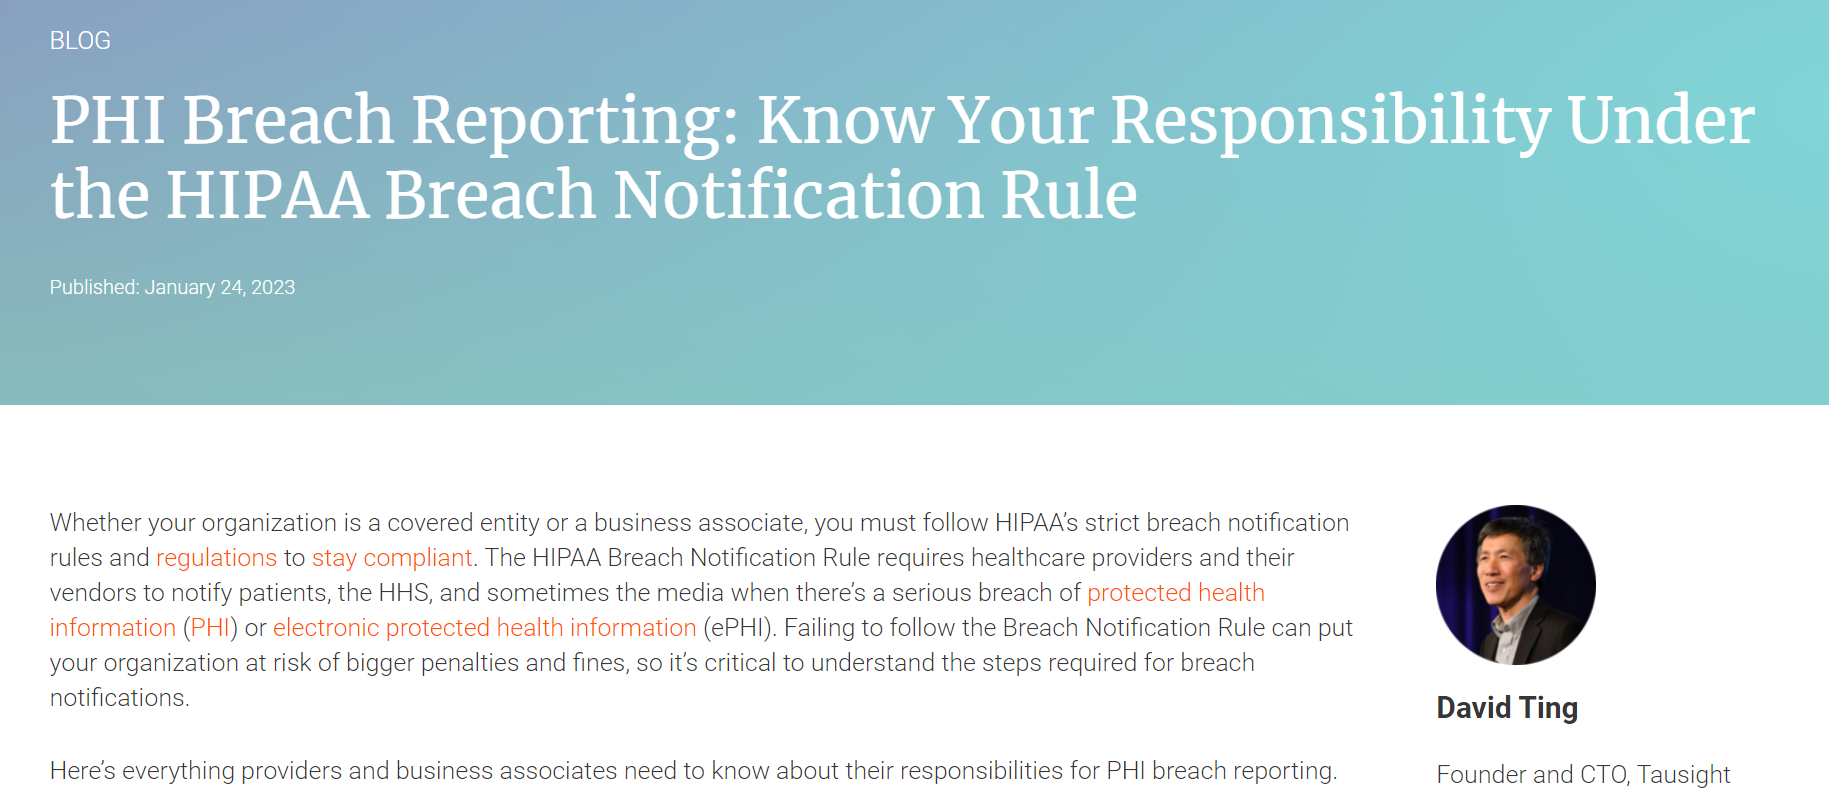 PHI Breach Reporting: Know Your Responsibility Under the HIPAA Breach Notification Rule